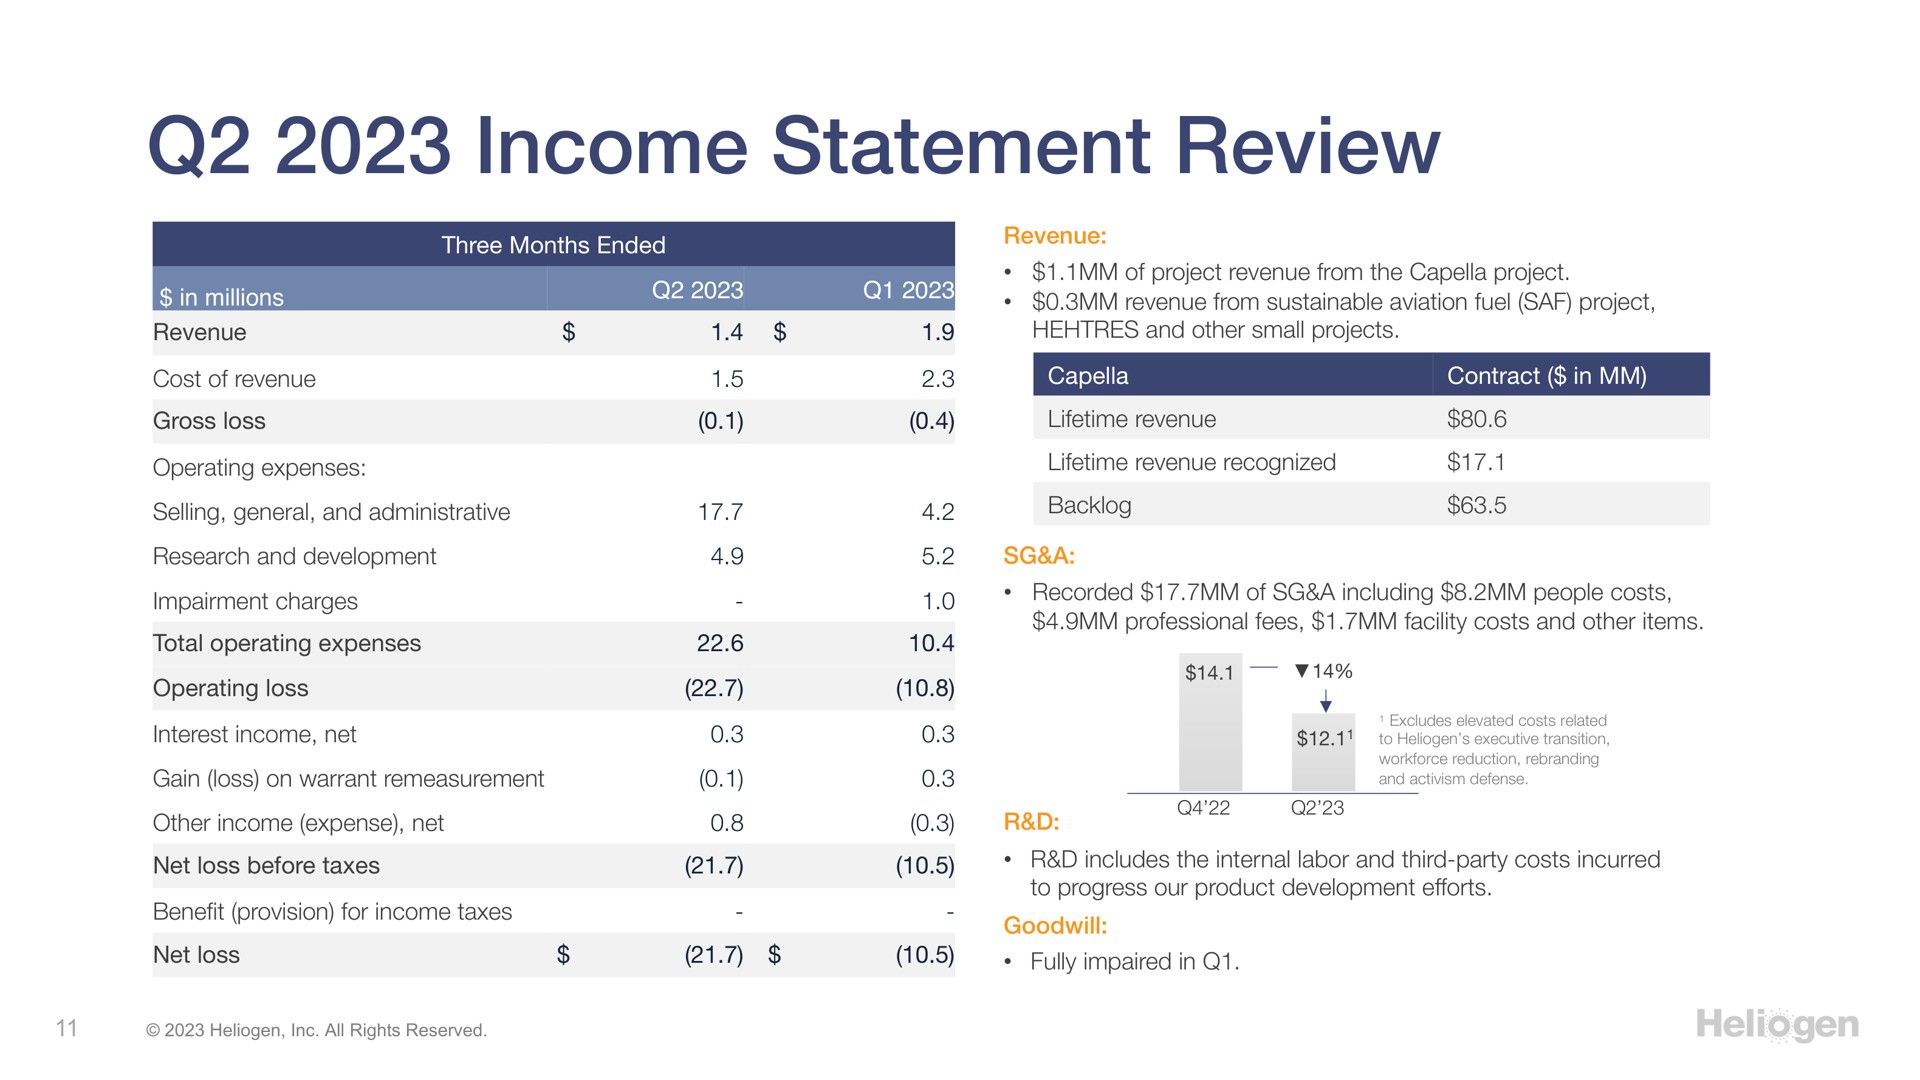 income statement review | Heliogen